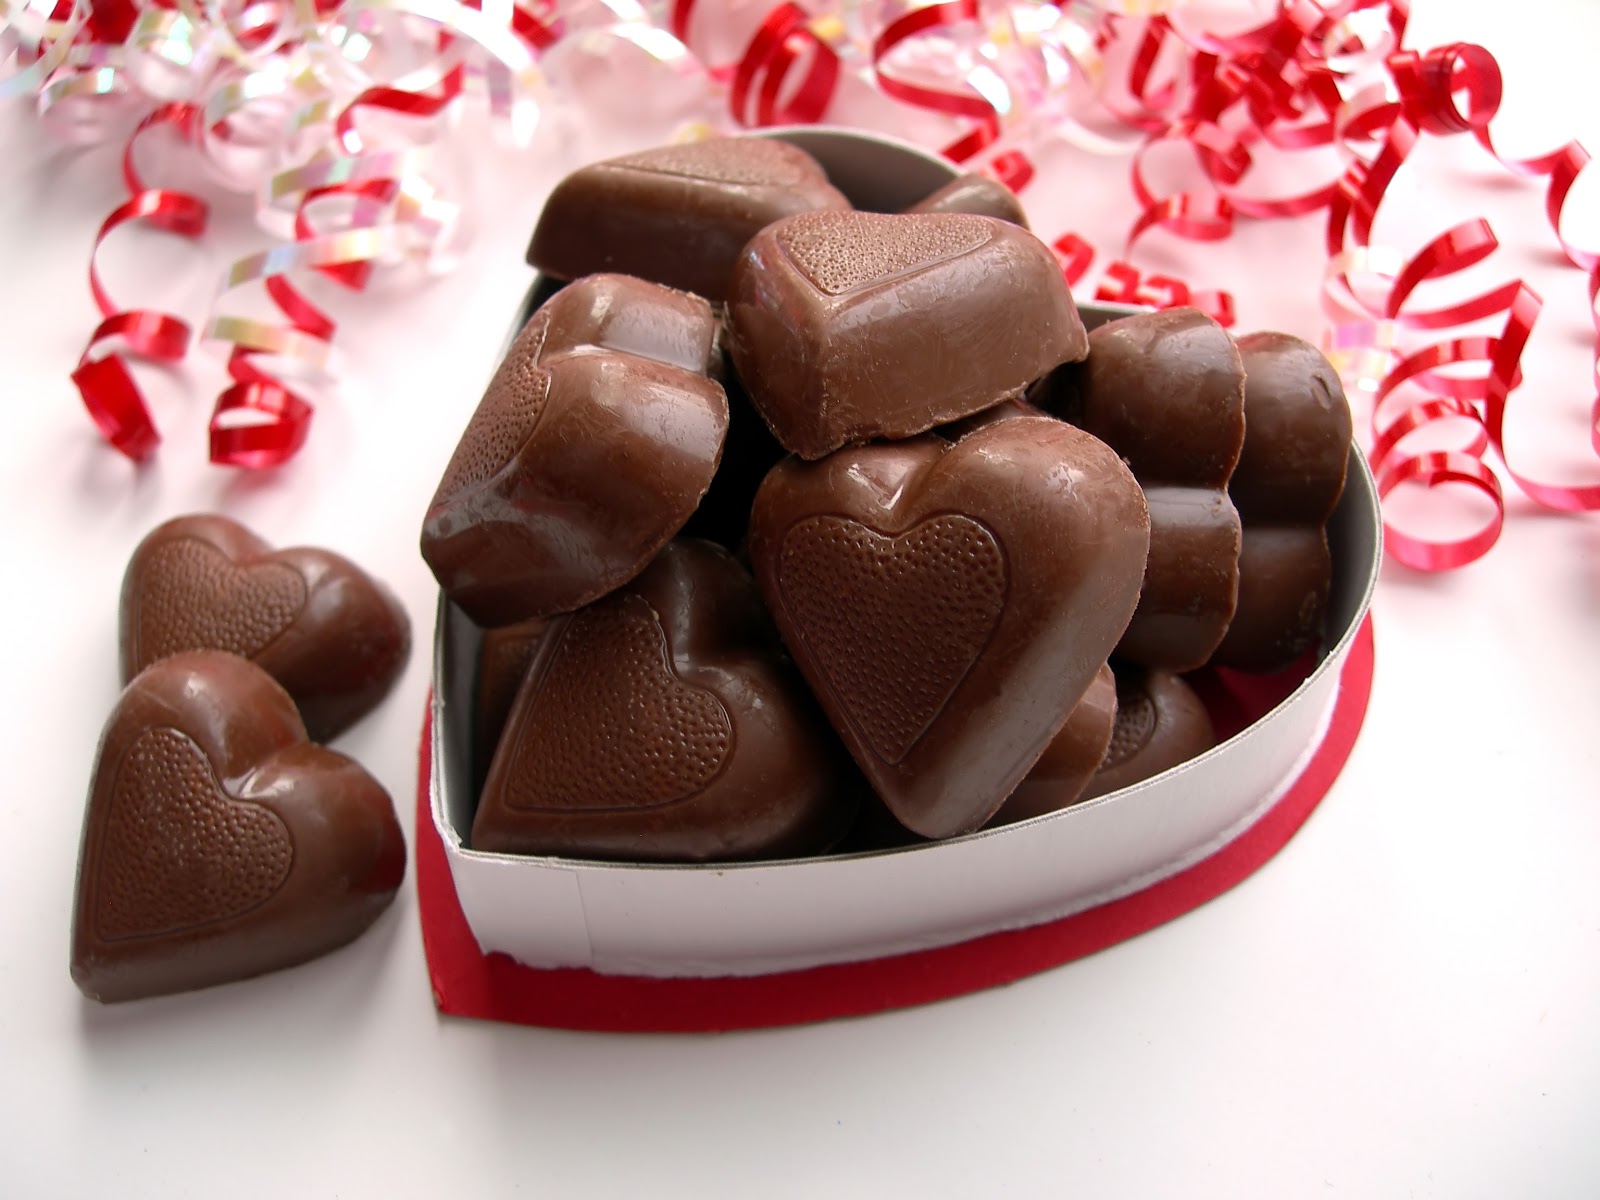 6. Valentine Day Chocolate Hd Wallpaper | Chocolate Pictures And Photos